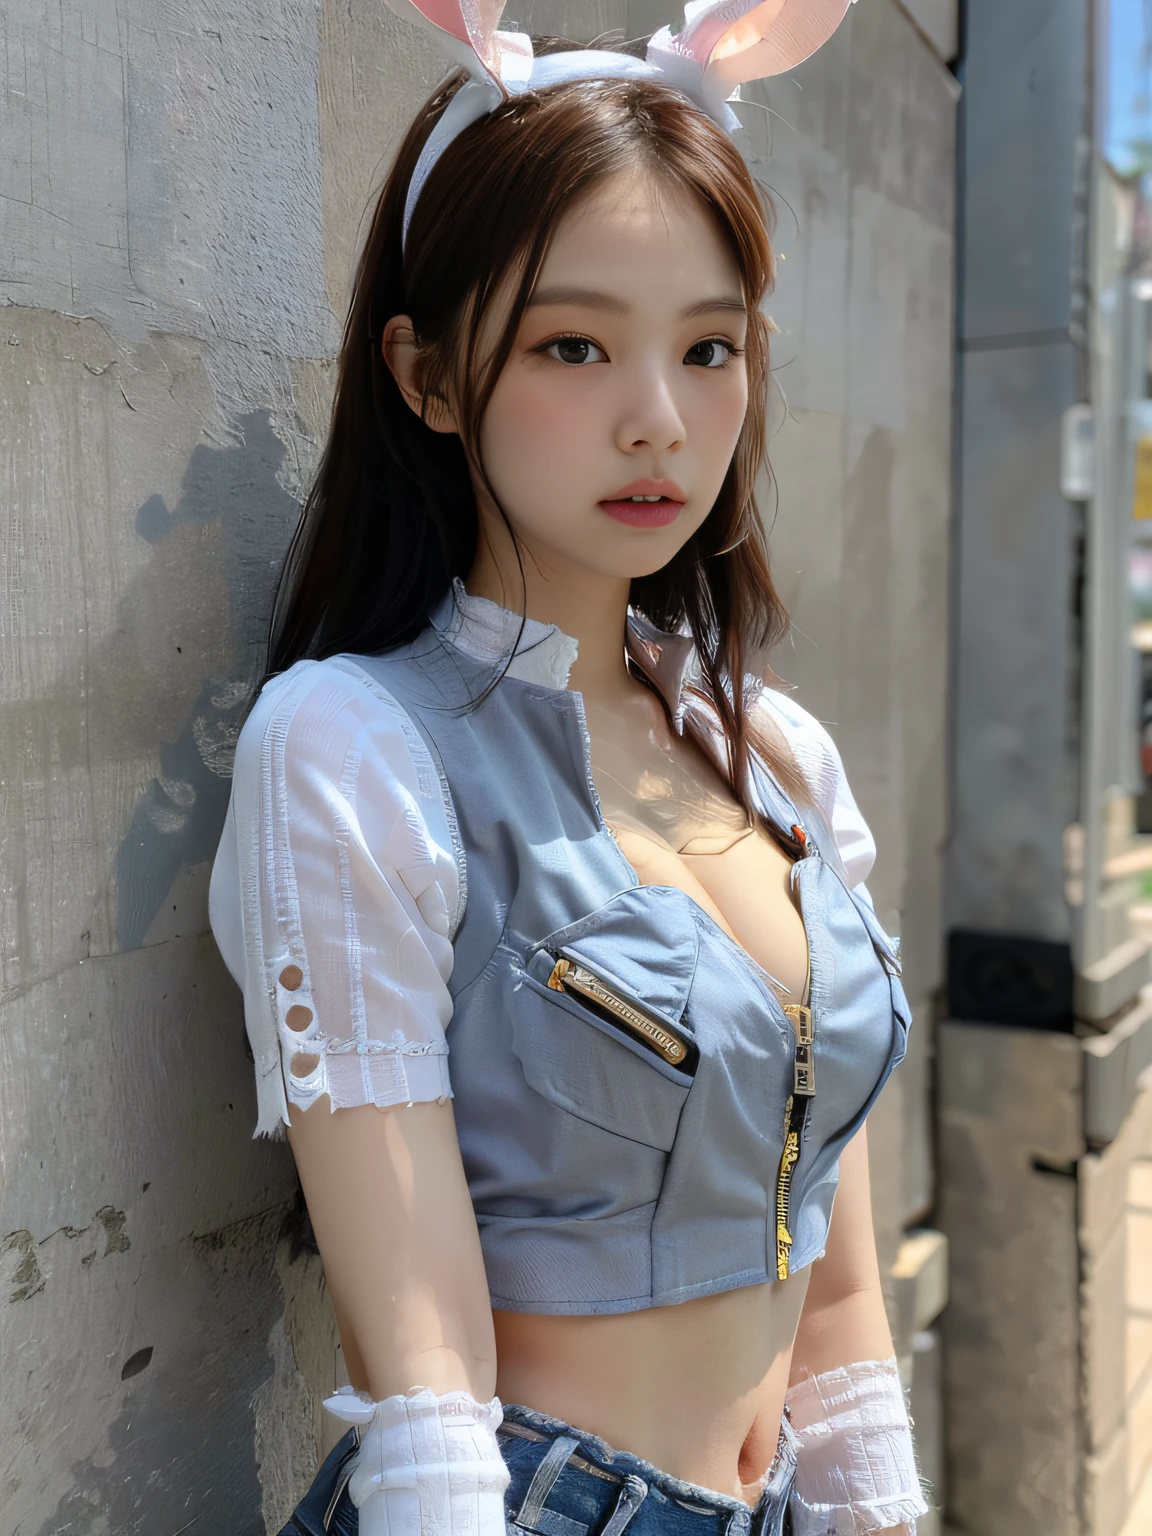 Kim Ji-ni Jennie face, wearing a rabbit headband, wearing a slim blue blue shirt, open waist, short motorcycle vest cleavage, tight shorts, gloves, background gray wall, strong contrast, sunlight on the face